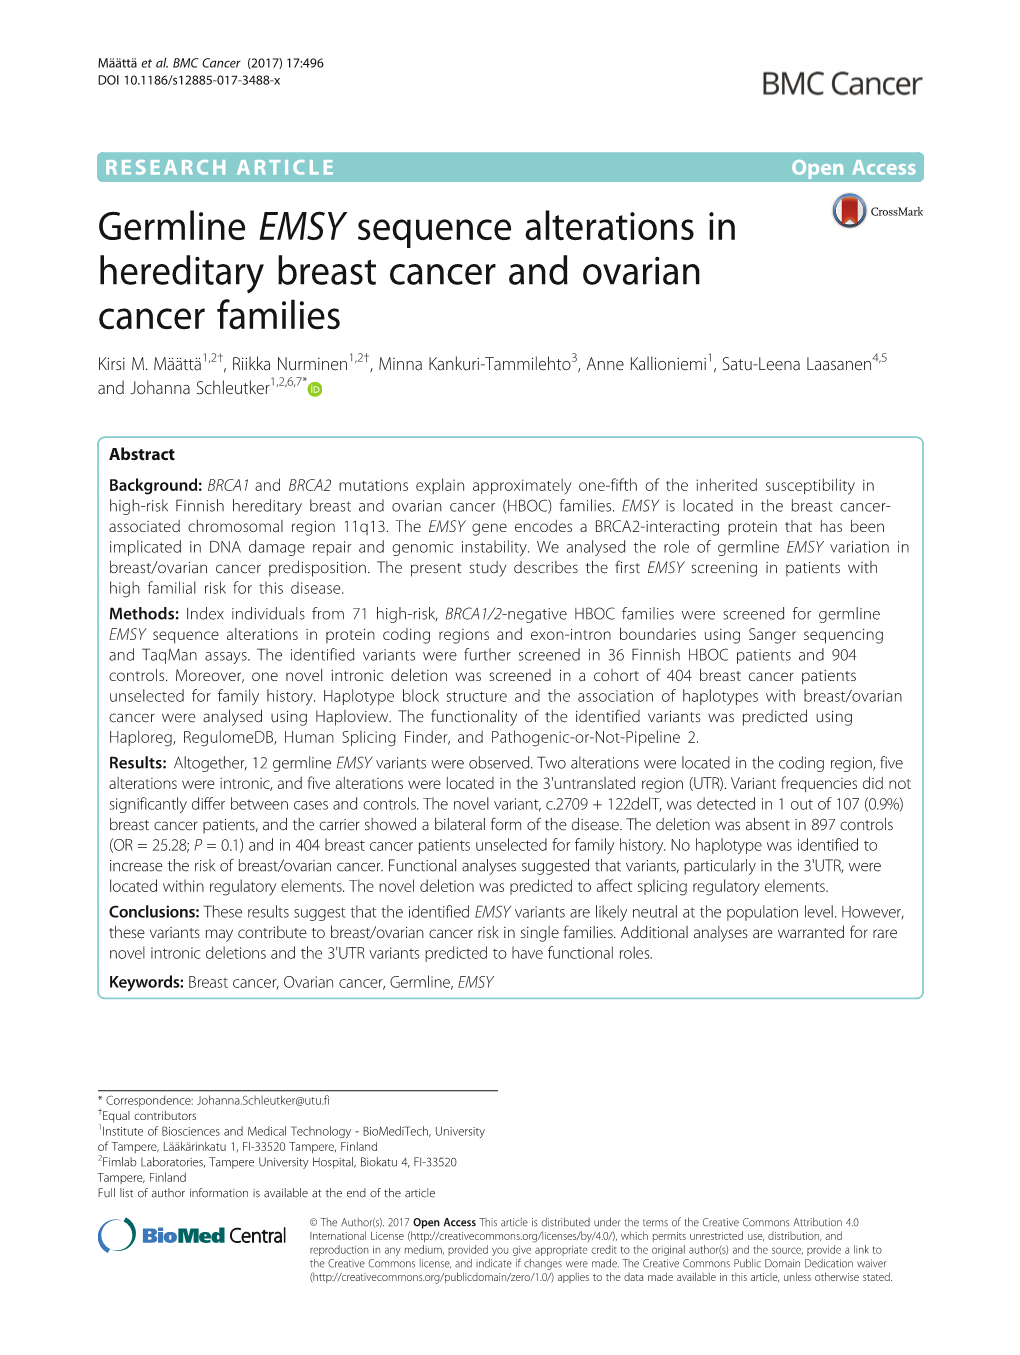 Germline EMSY Sequence Alterations in Hereditary Breast Cancer and Ovarian Cancer Families Kirsi M